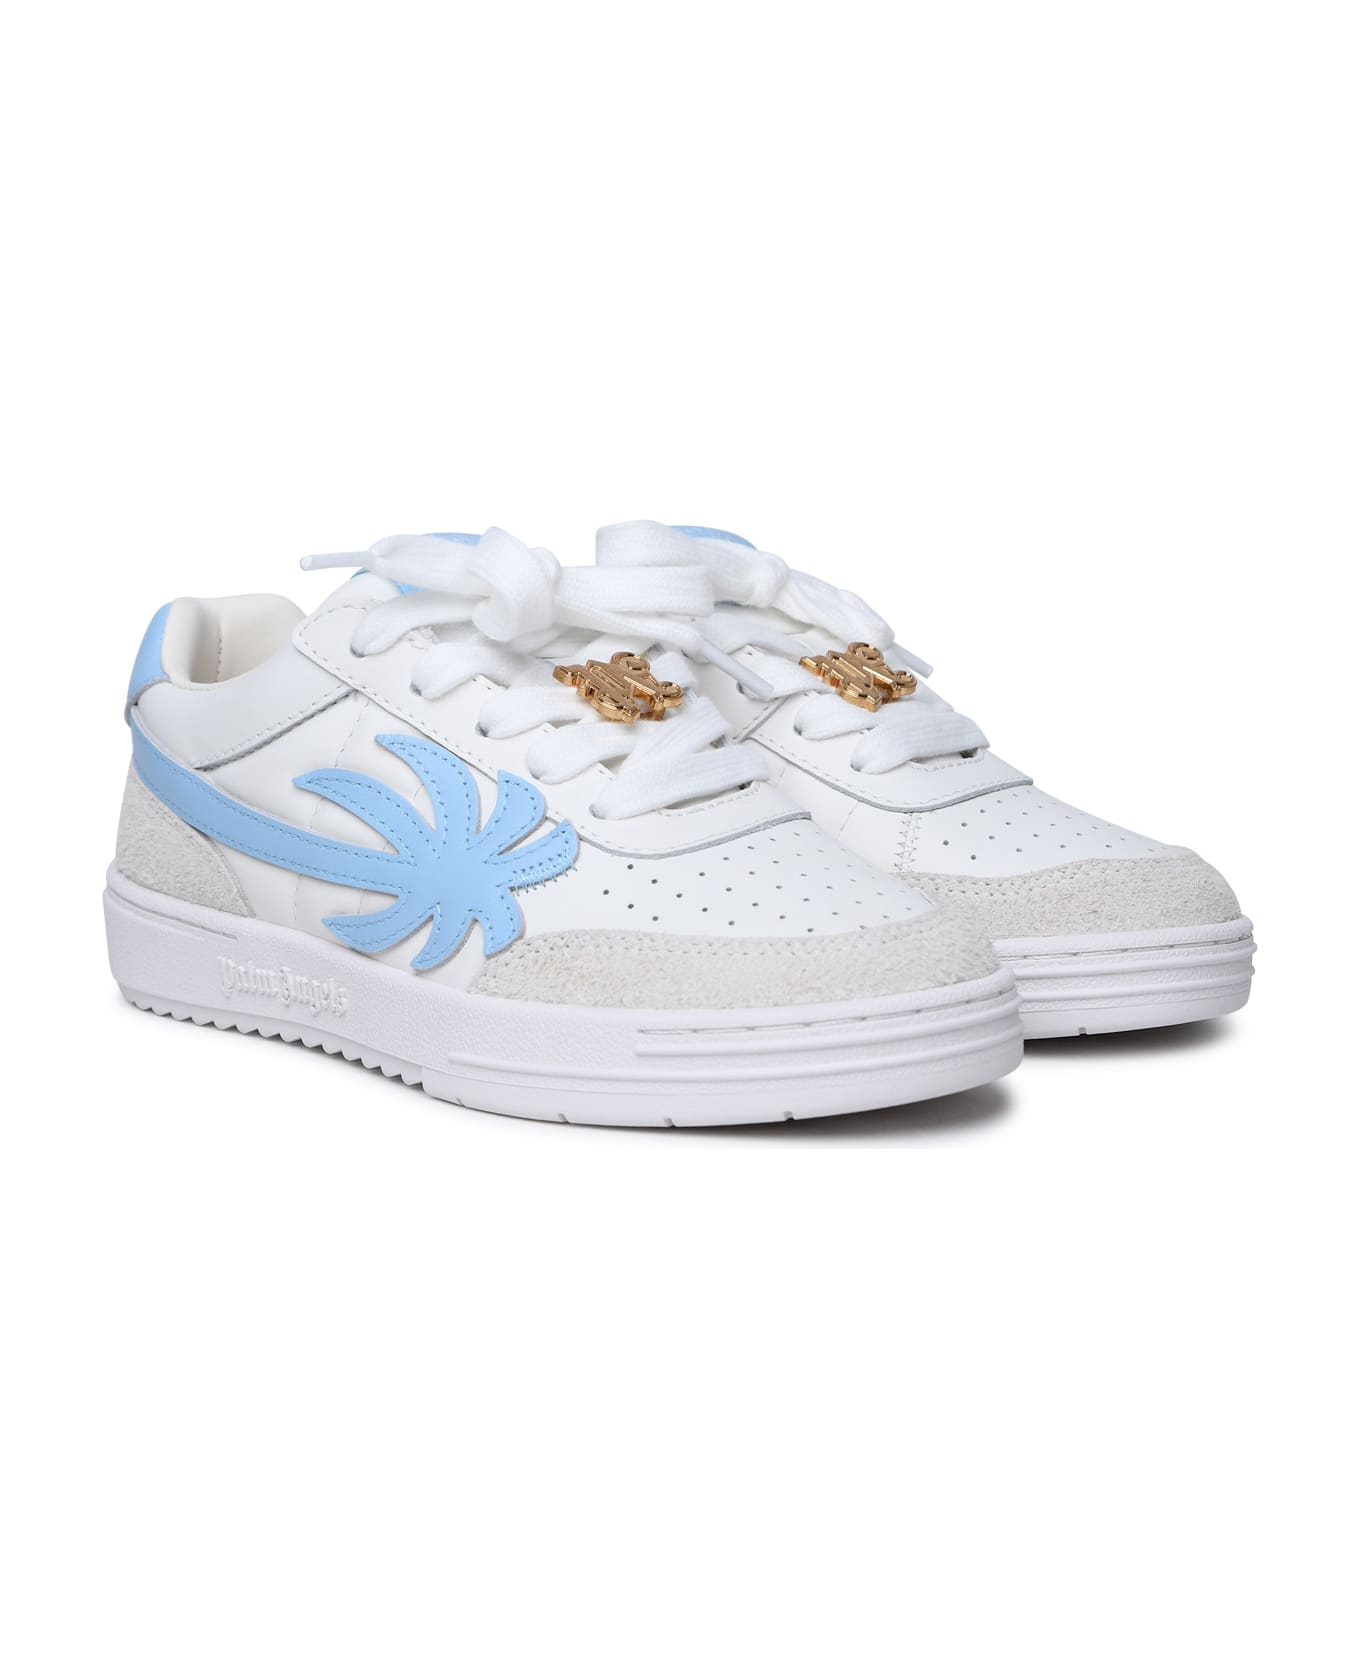 Palm Angels Palm Beach University Sneakers - White